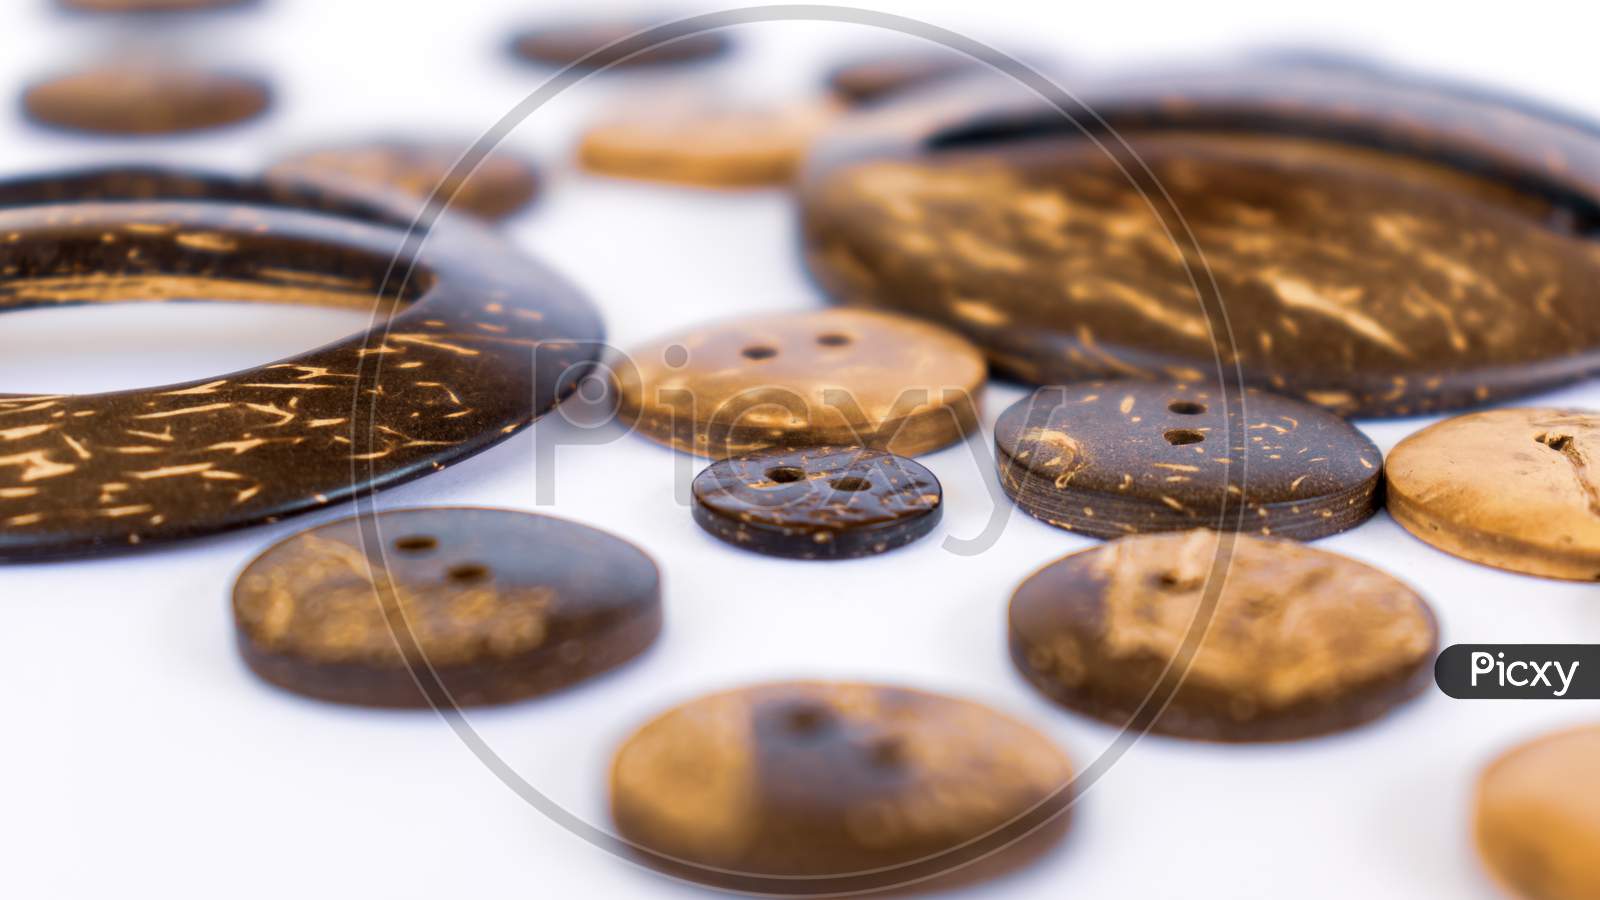 Coconut Shell Buttons Spreads Across White Background